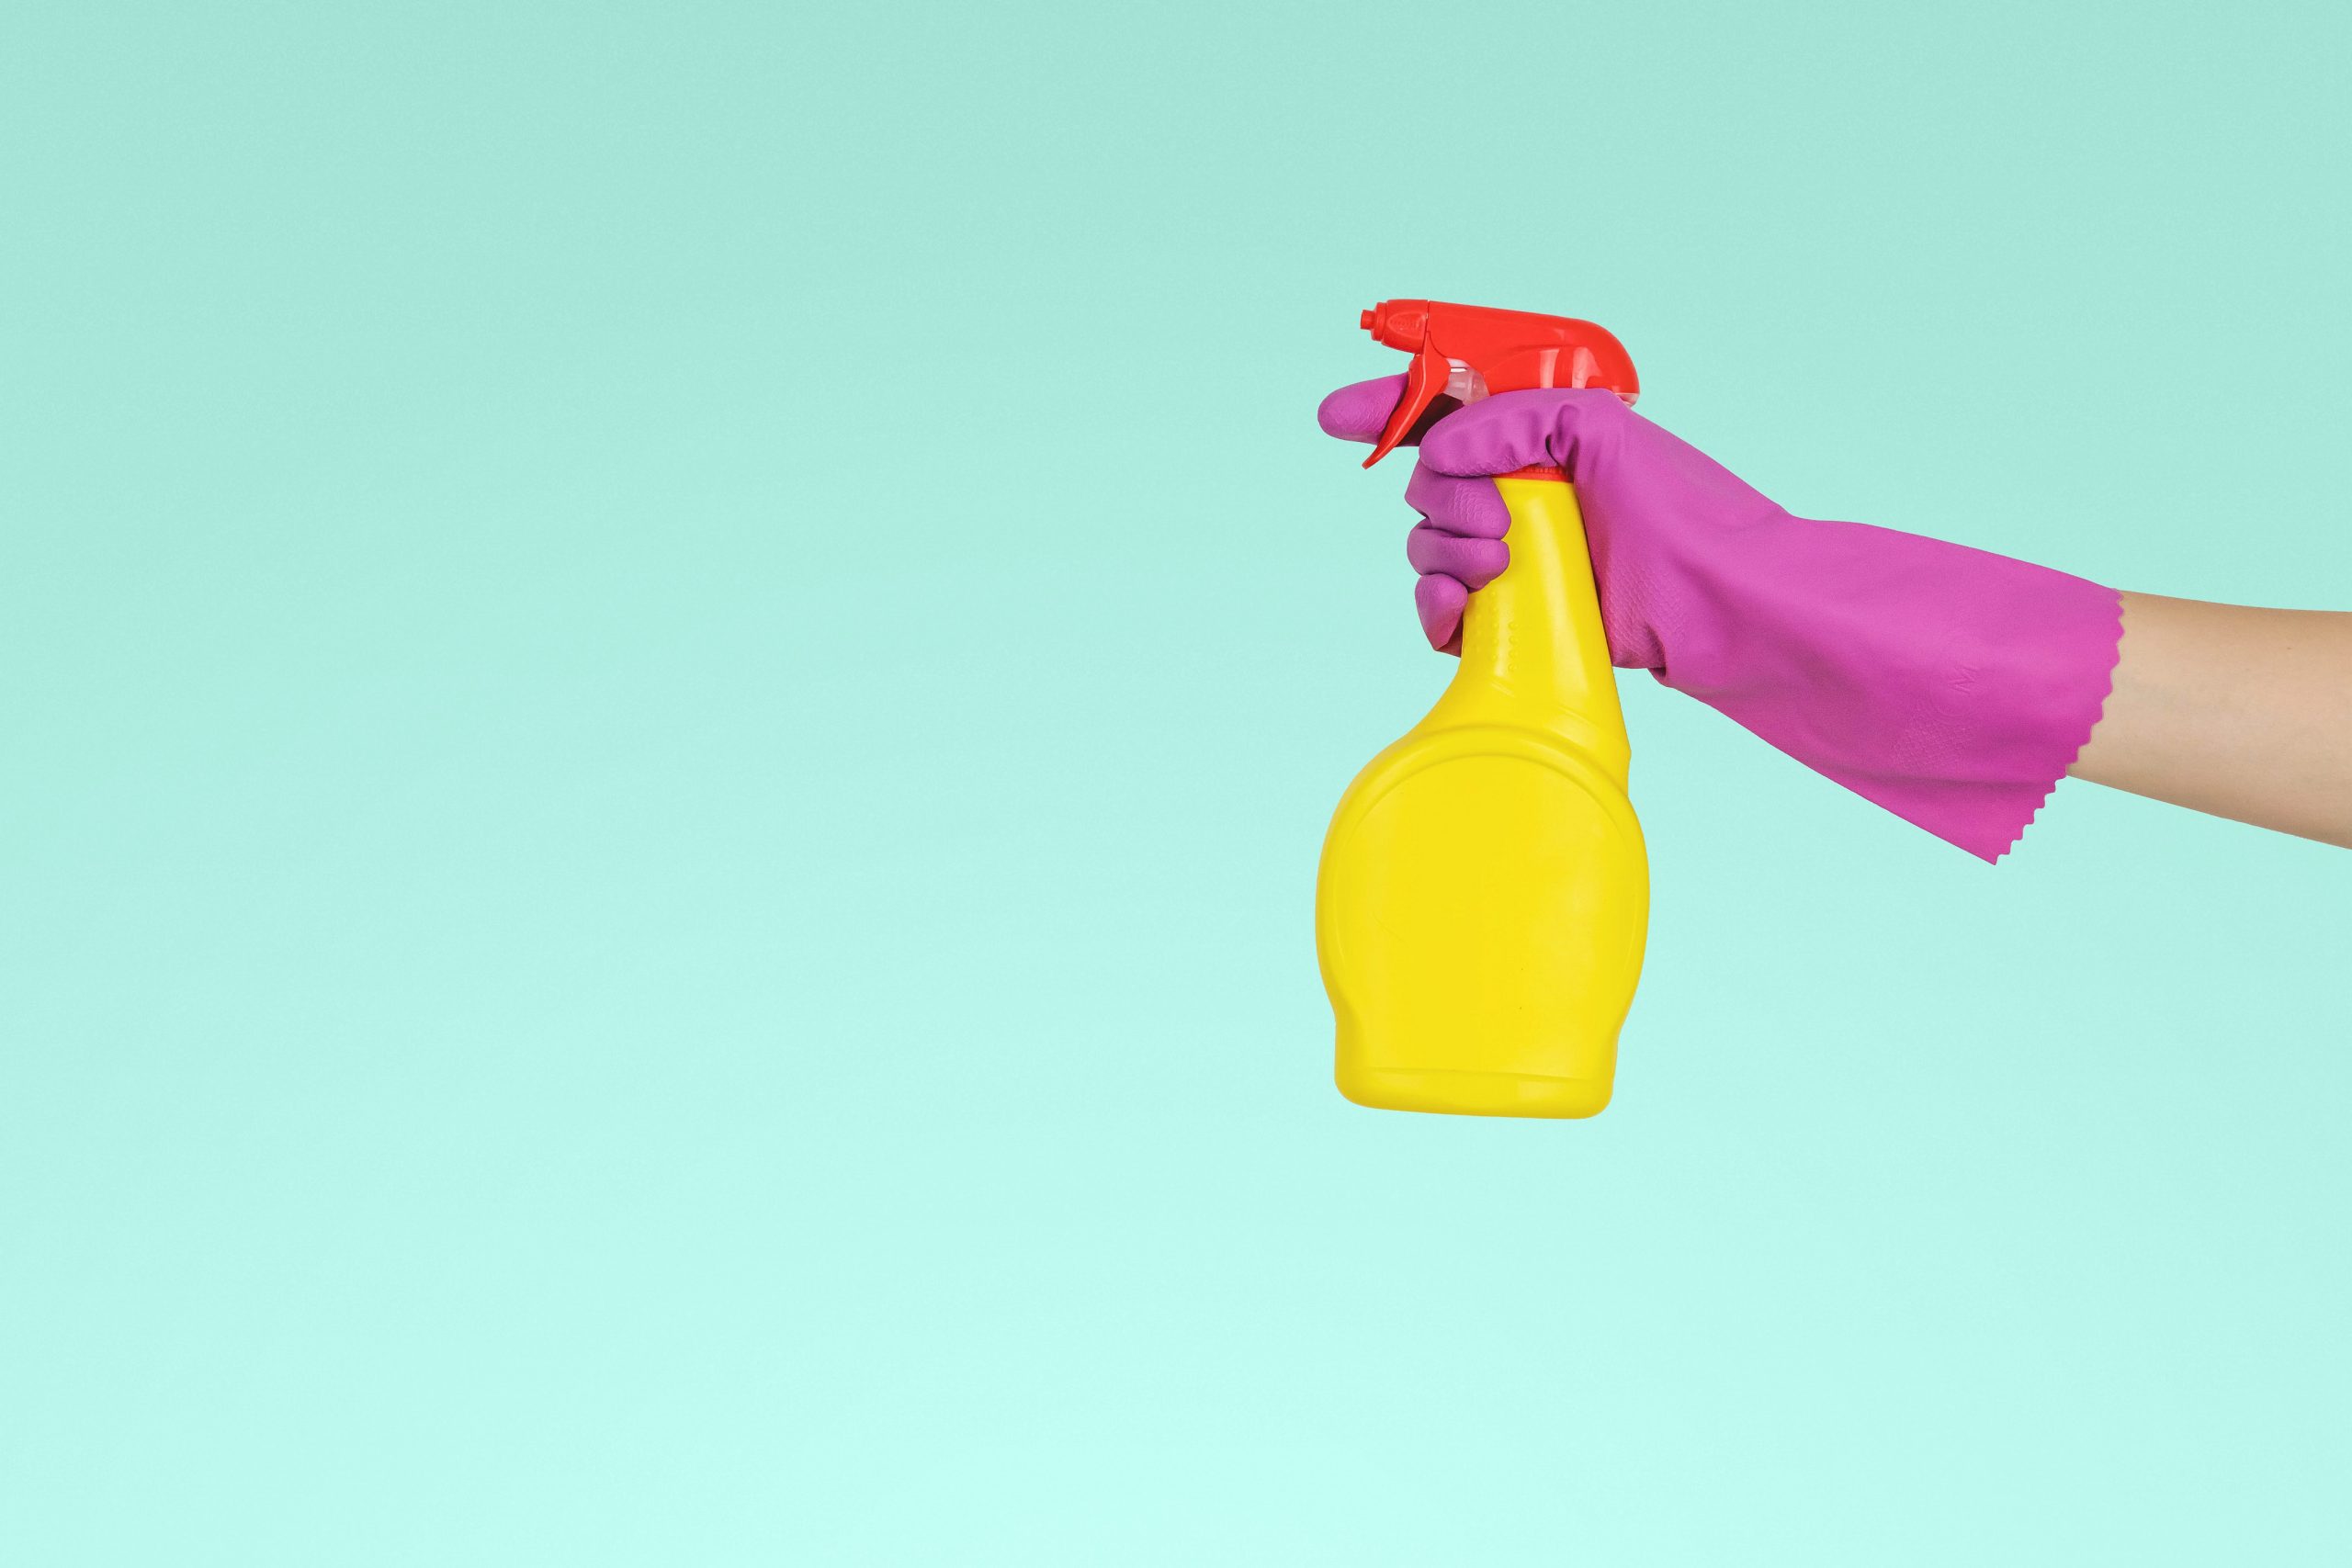 A hand wearing a rubber glove holding some cleaning spray.